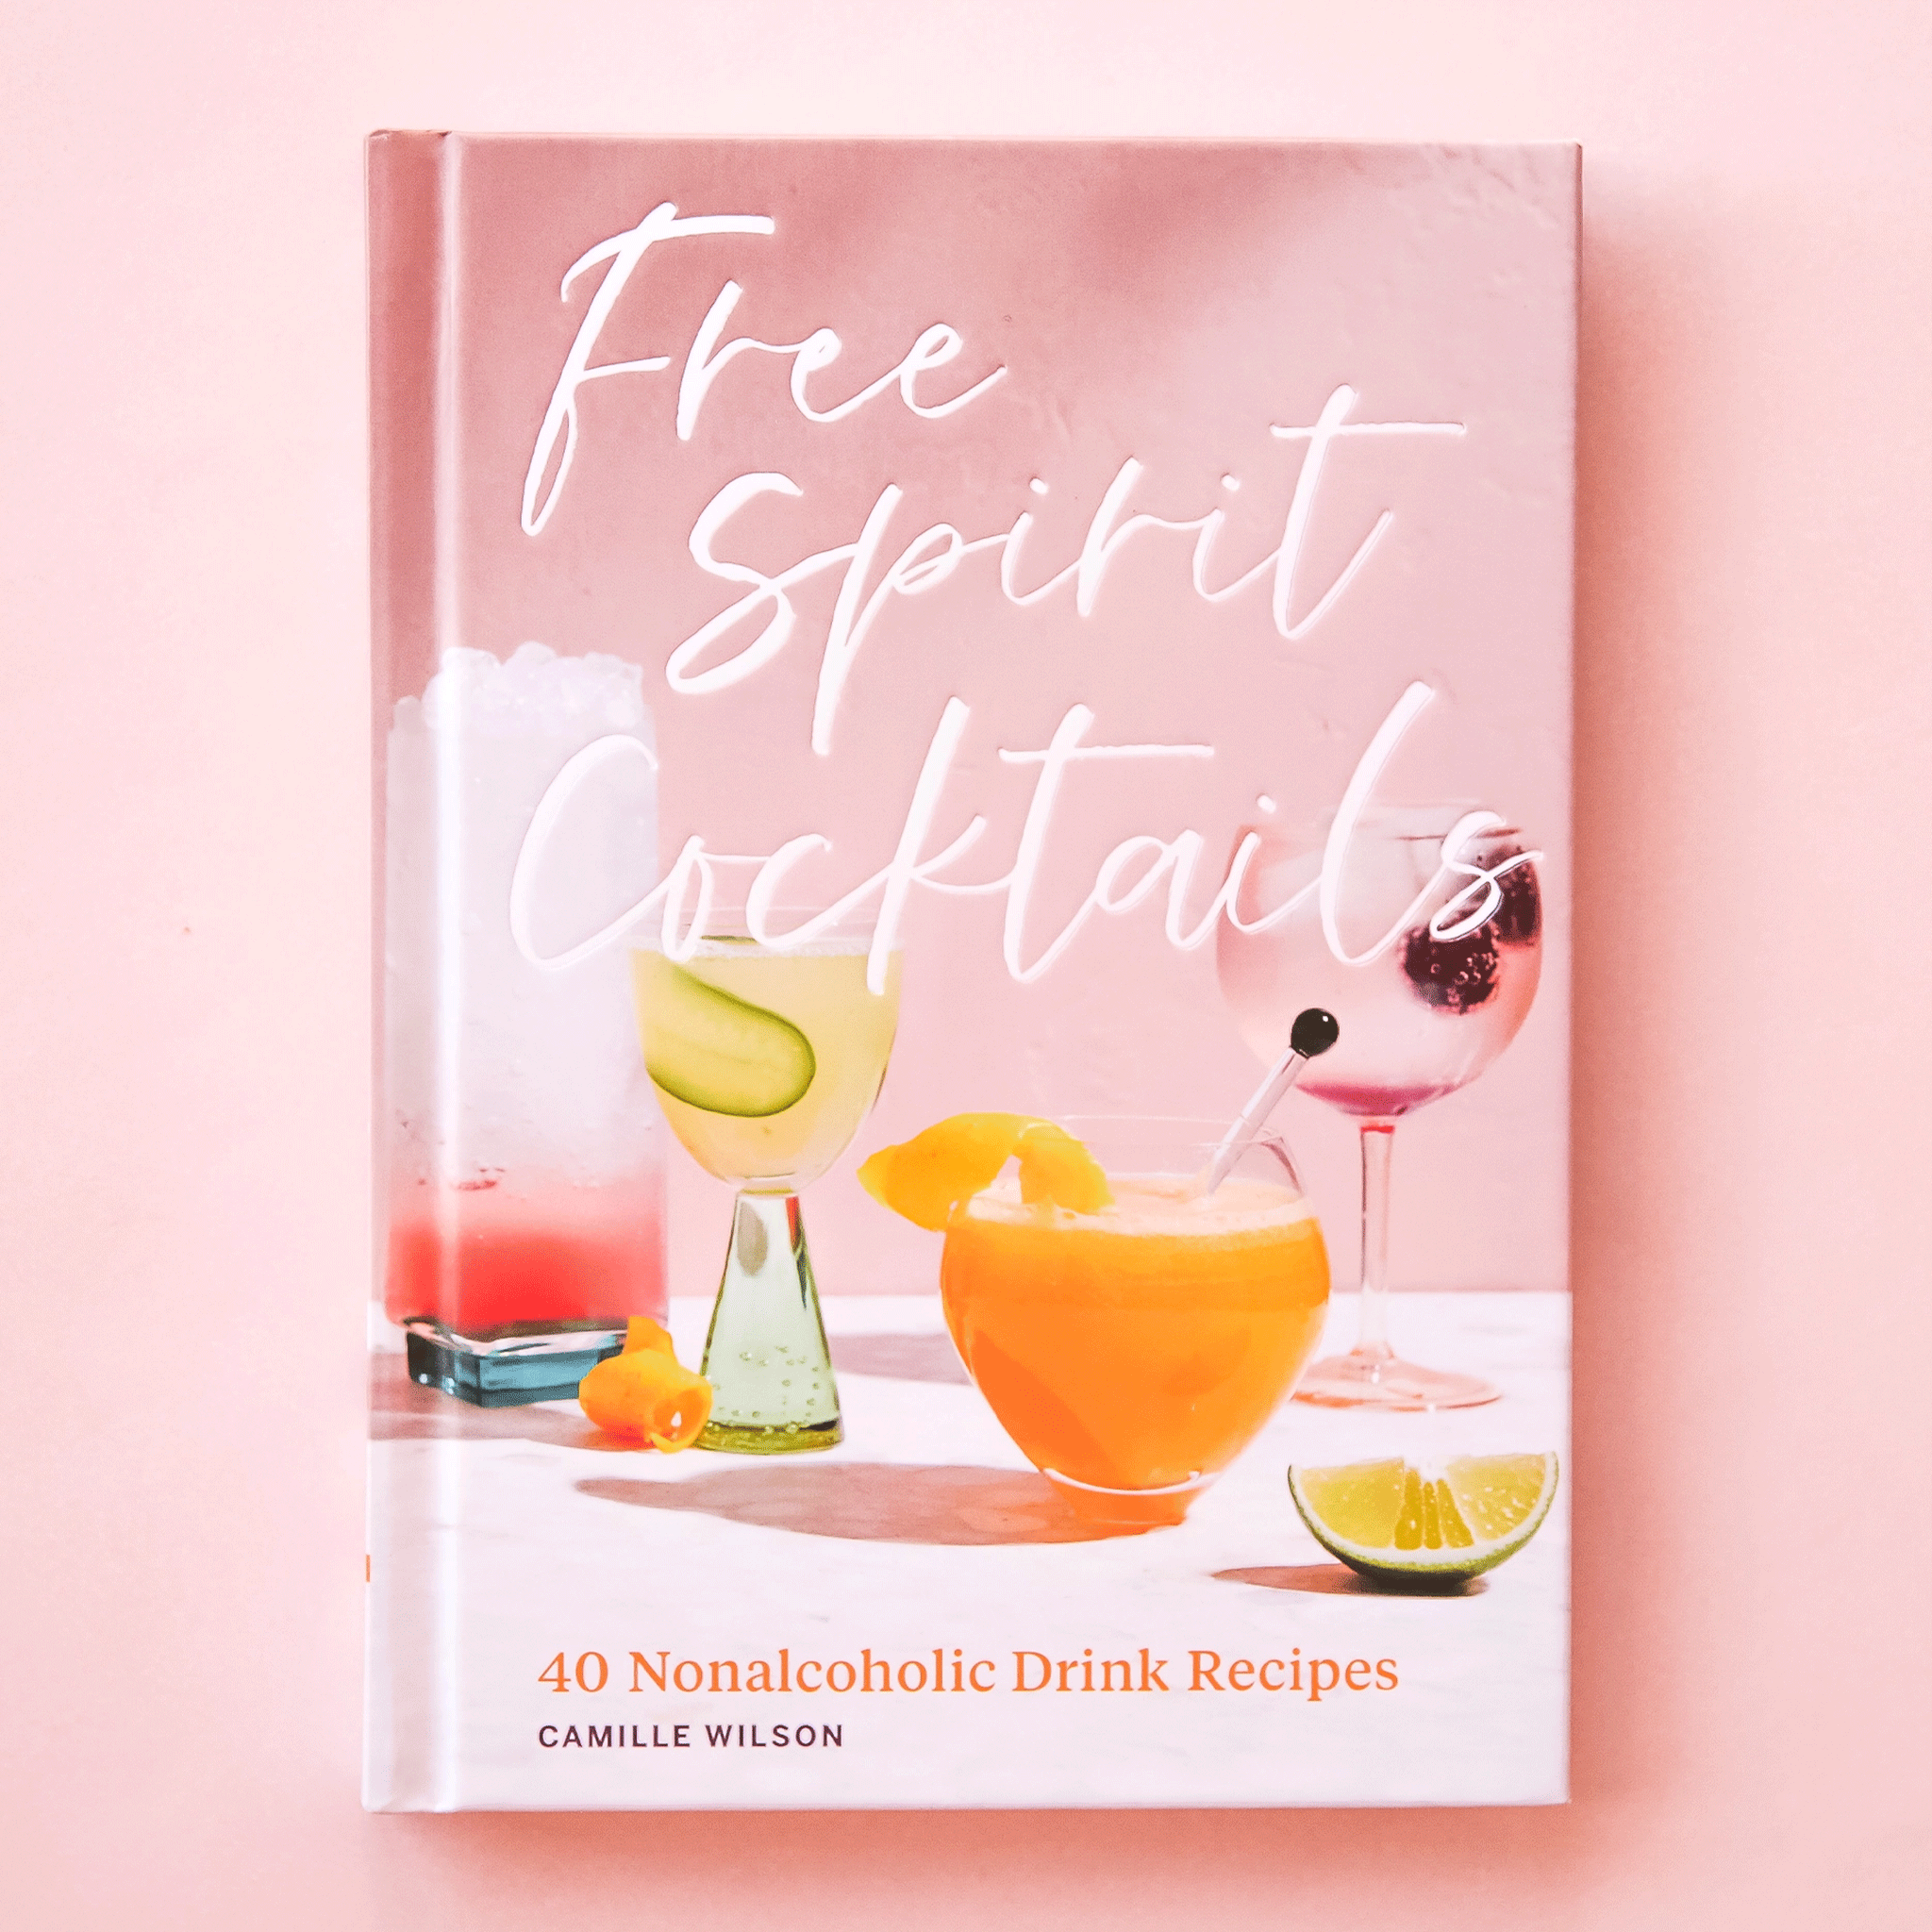 A mauve front cover with various cocktails and and the title "Free Spirit Cocktails, 40 Nonalcoholic Drink Recipes".